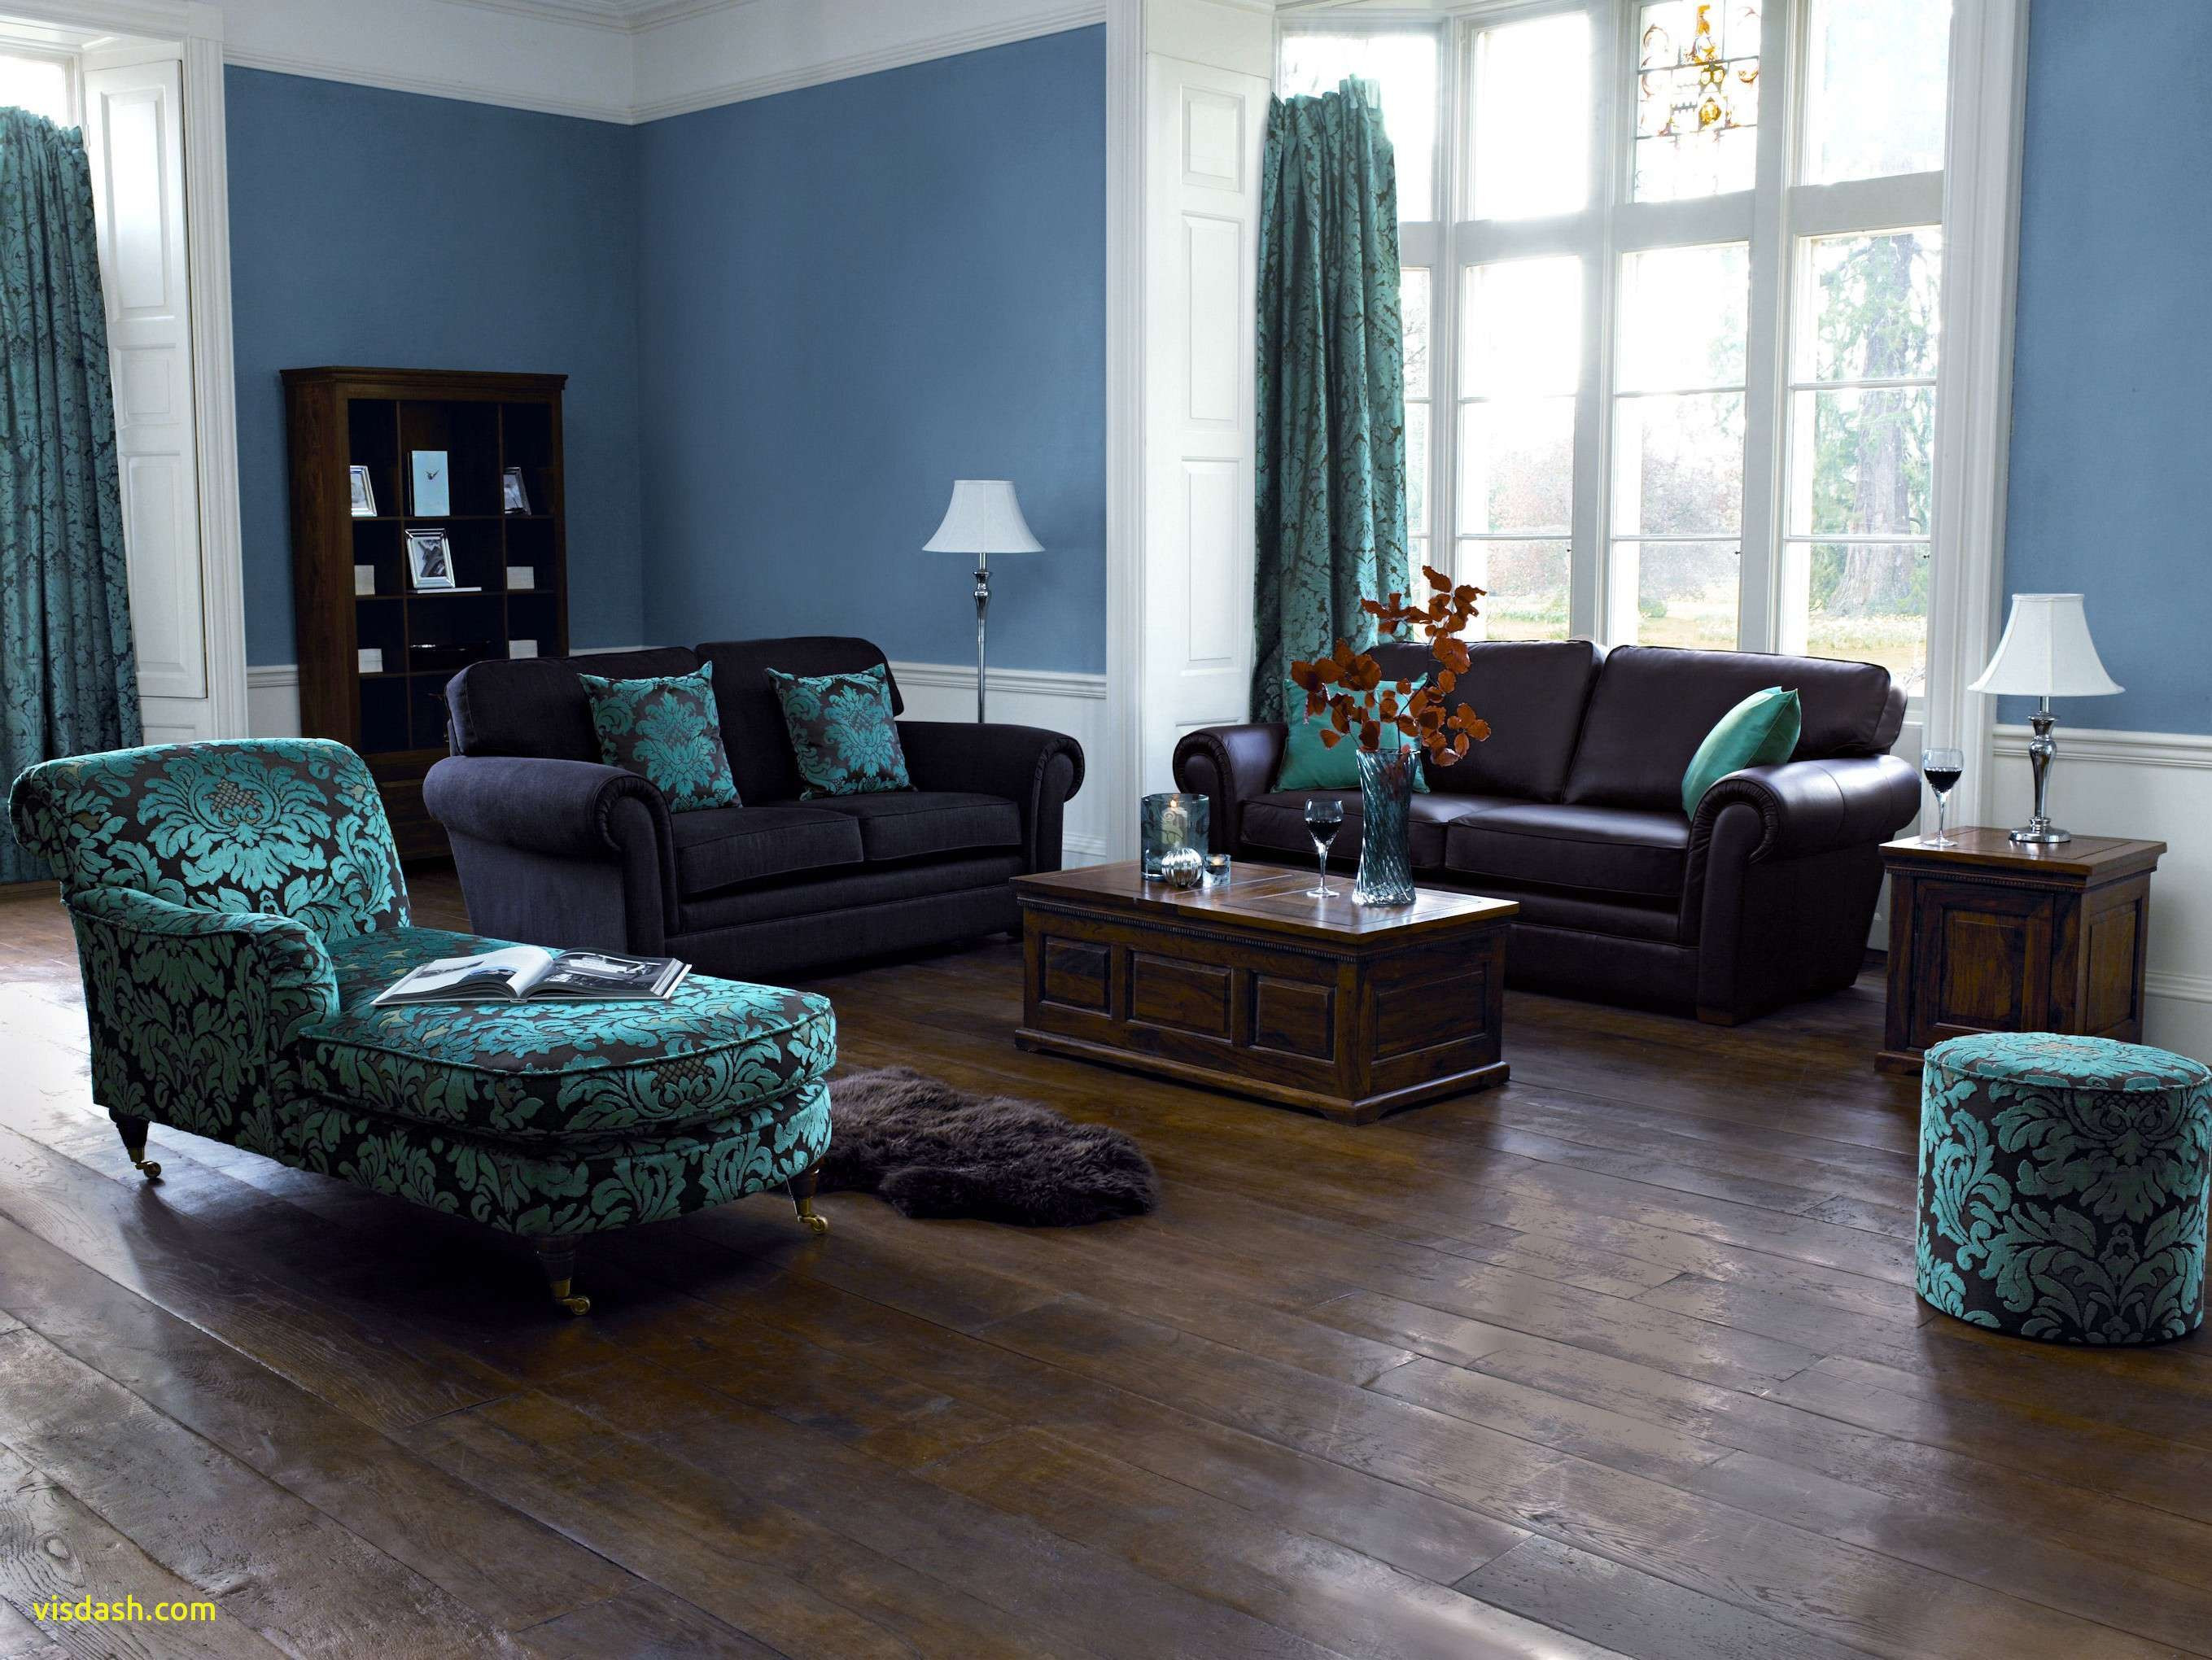 30 Best Couches for Dark Hardwood Floors 2024 free download couches for dark hardwood floors of awesome living room ideas dark blue sofa home decor intended for living room ideas dark blue sofa new white finish wooden wall decorating ideas living roo